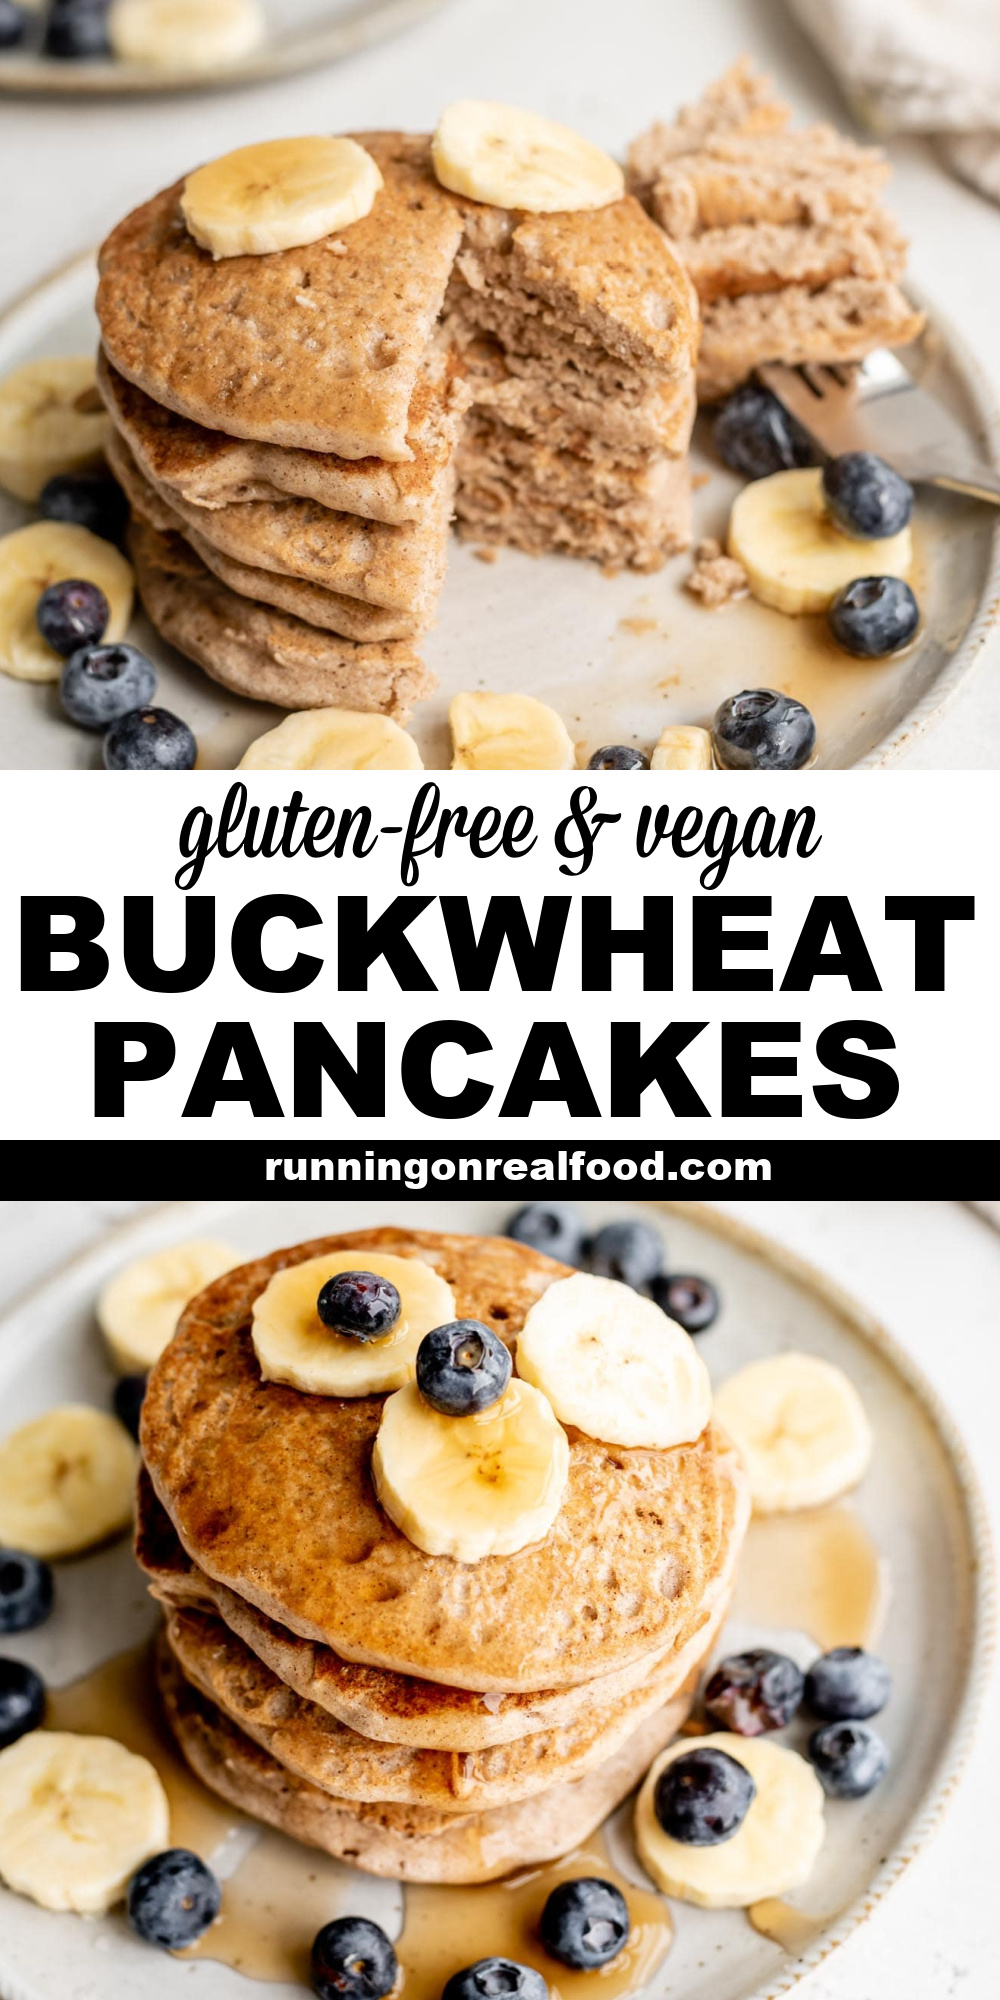 Pinterest graphic with an image and text for buckwheat pancakes.